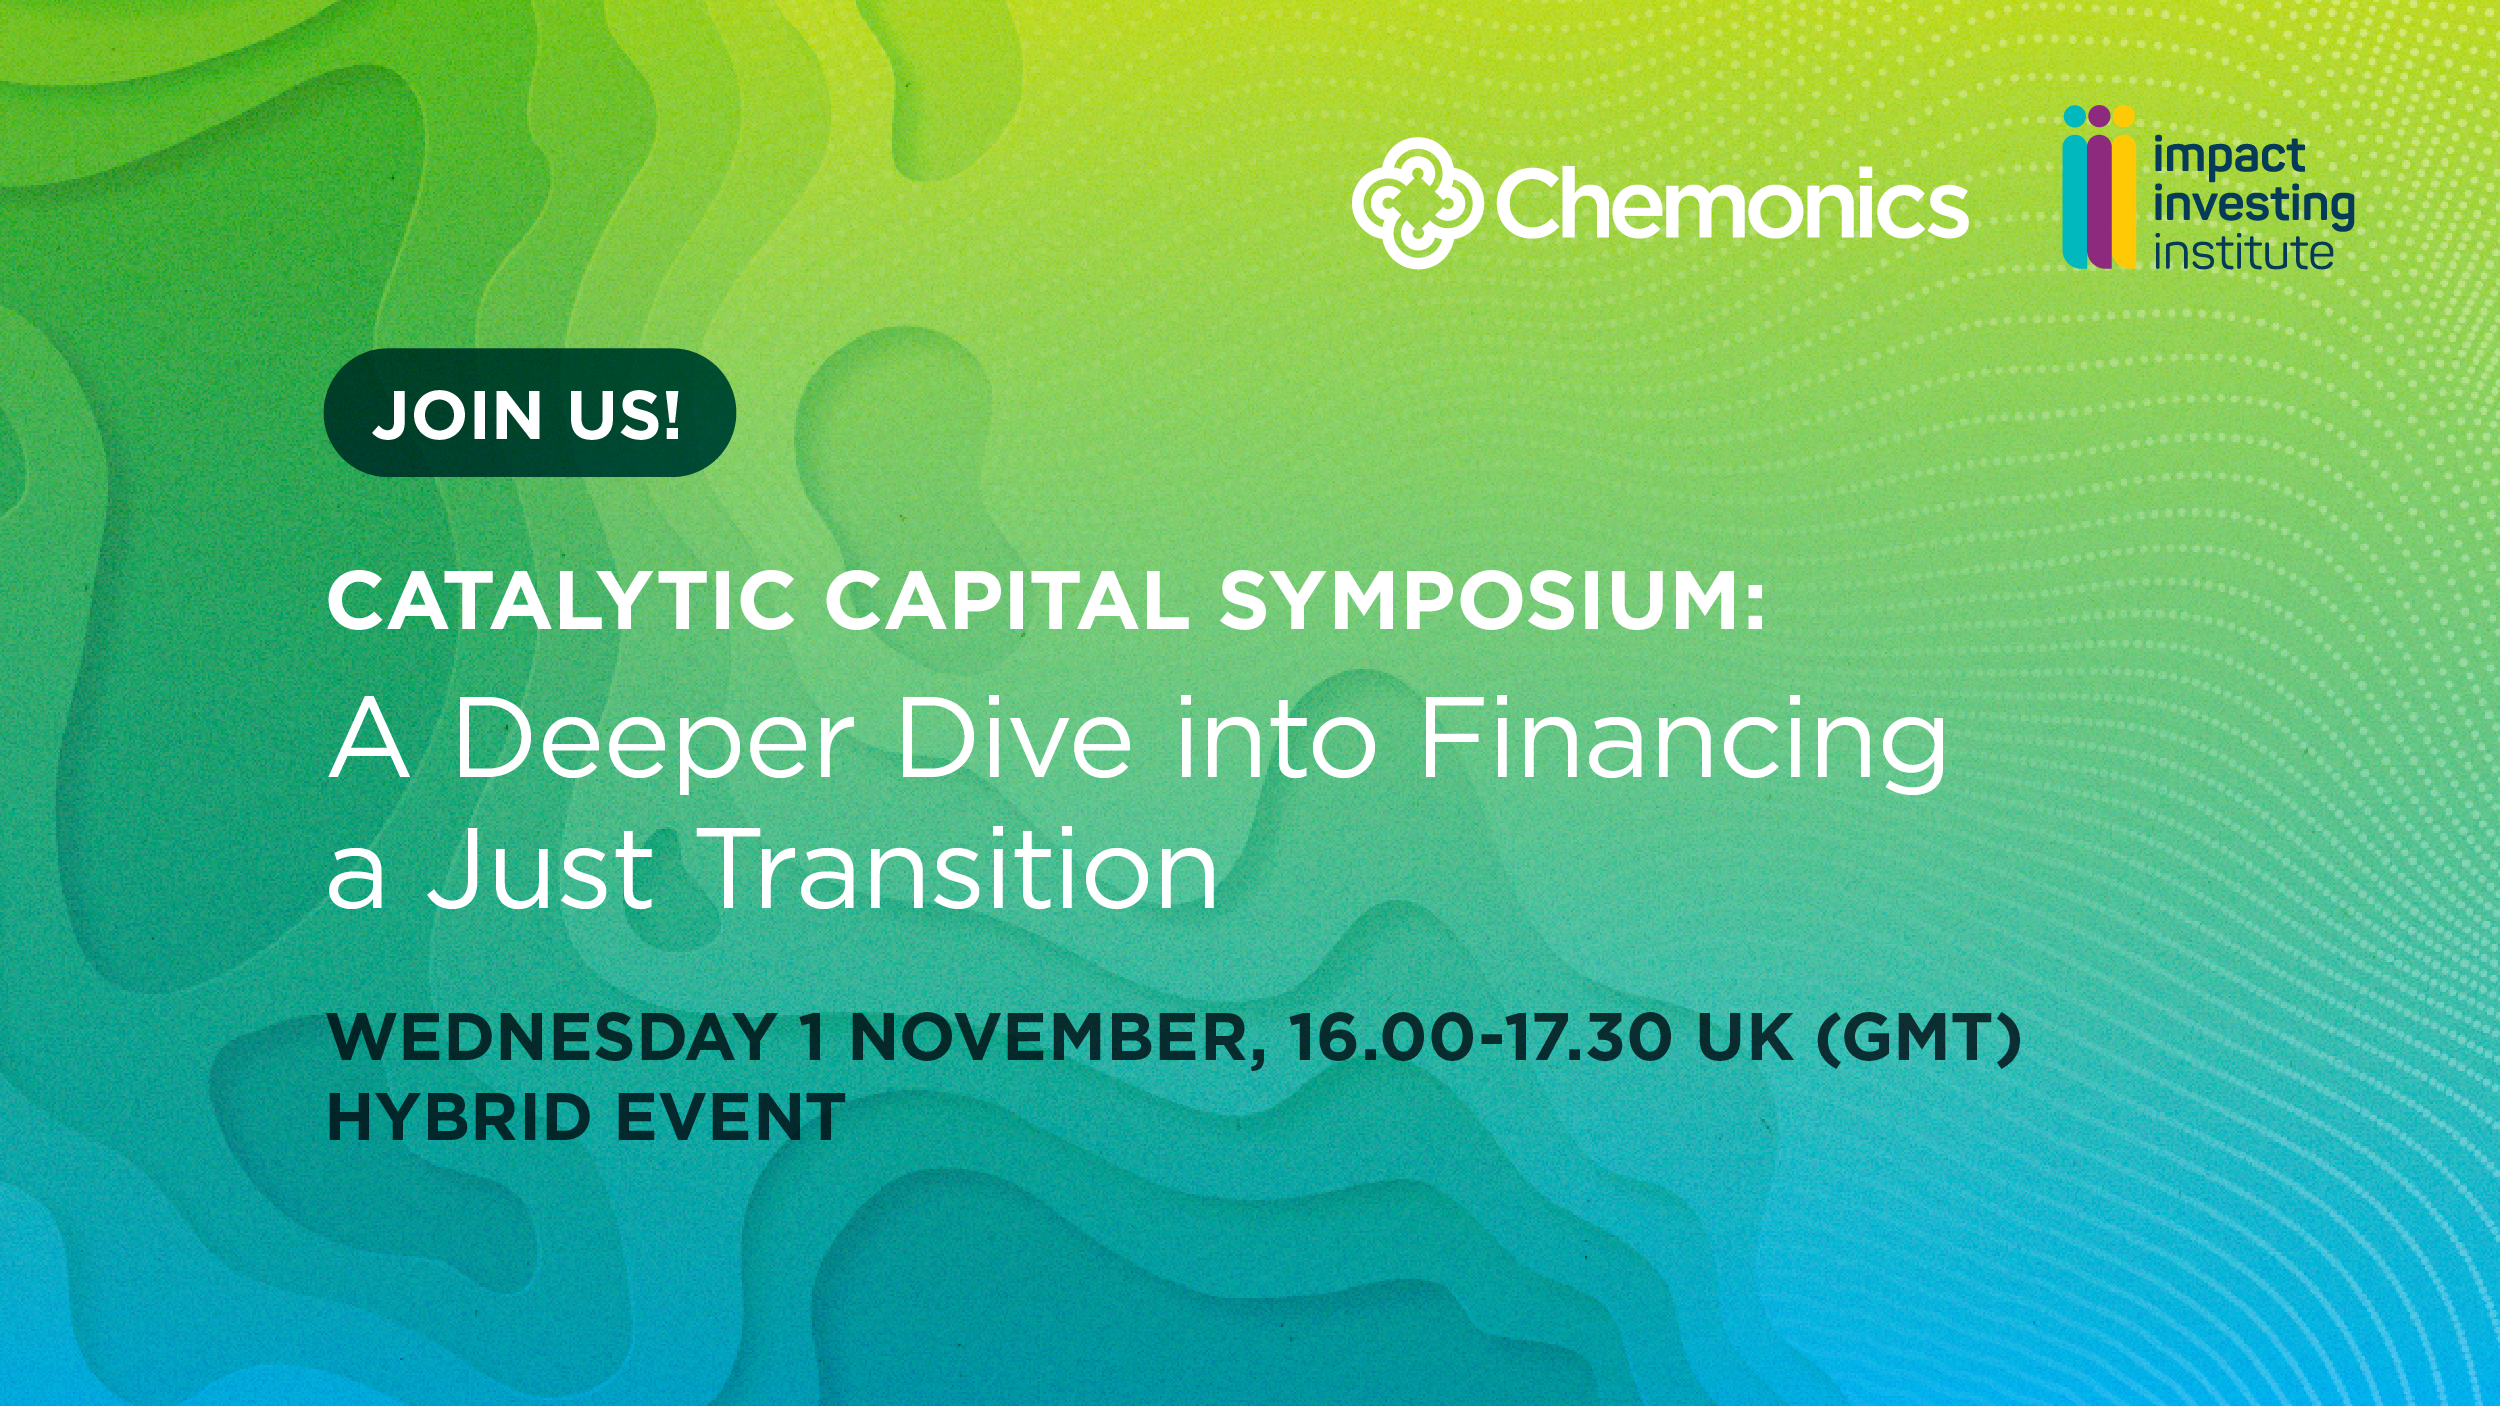 Catalytic capital symposium: a deeper dive into financing a just transition 